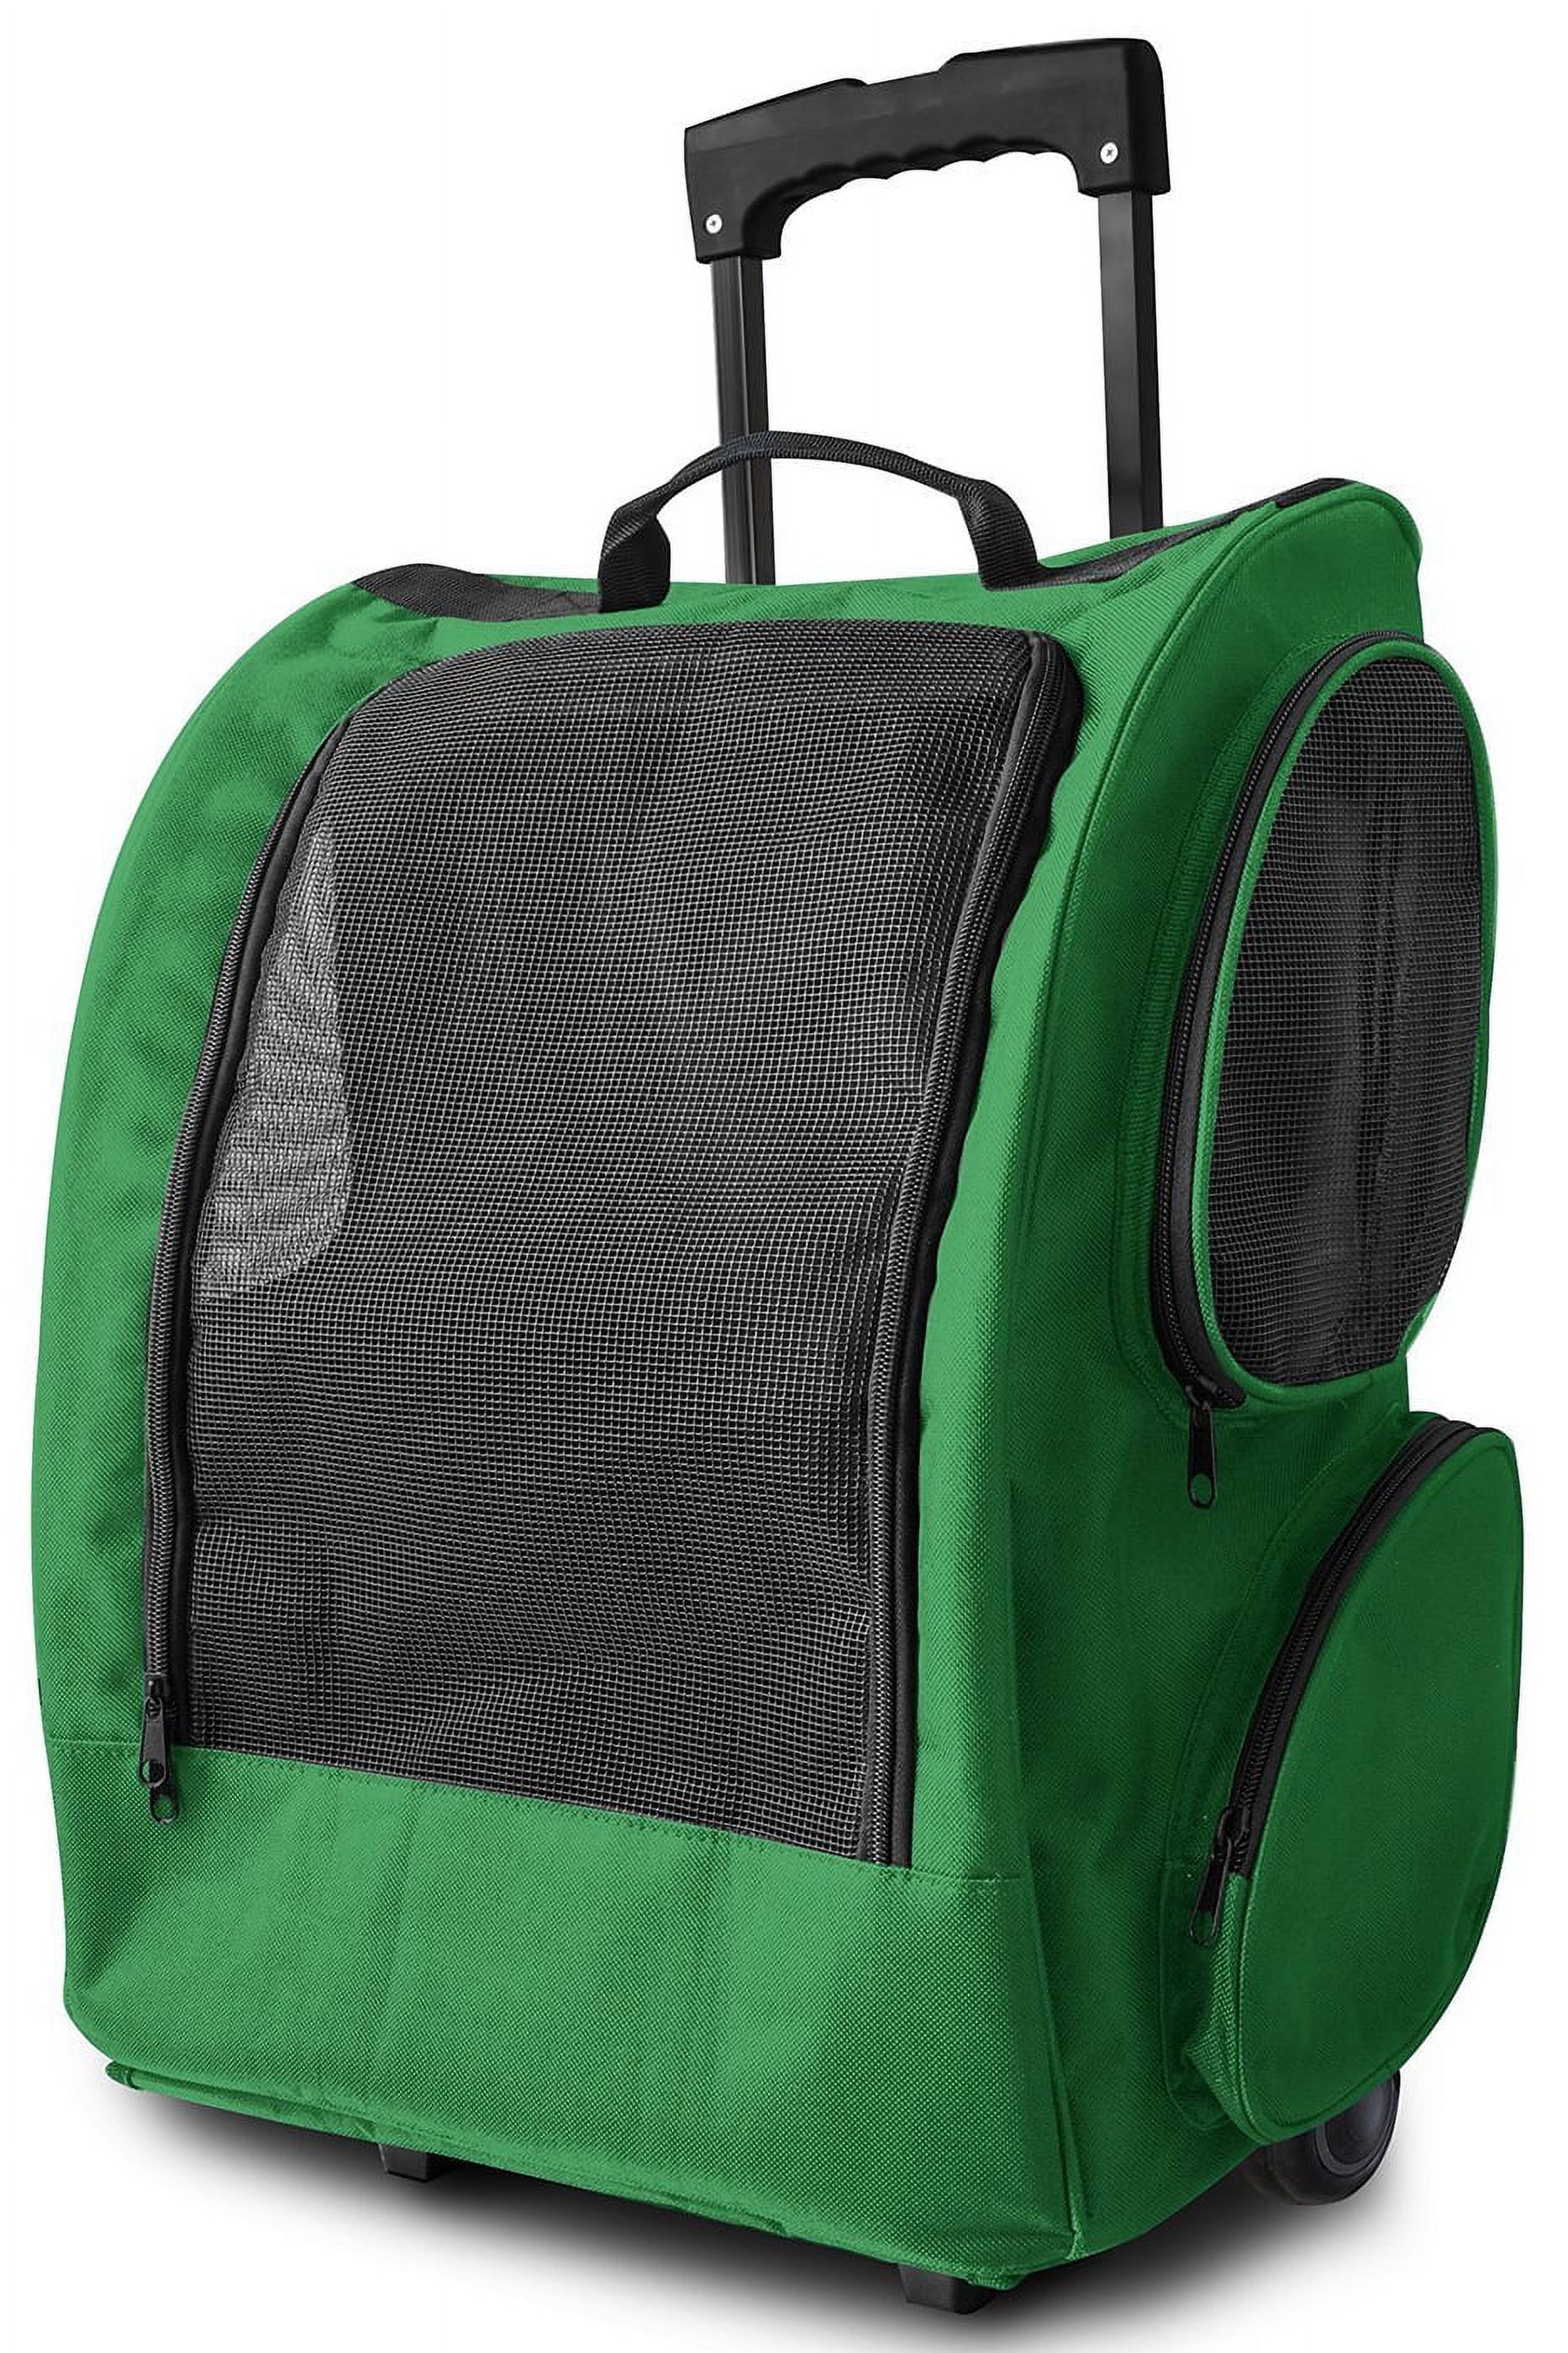 Paws & Pals Pet Carrier Ultimate Breathable Rolling Travel Backpack for Dogs and Cats - image 1 of 3